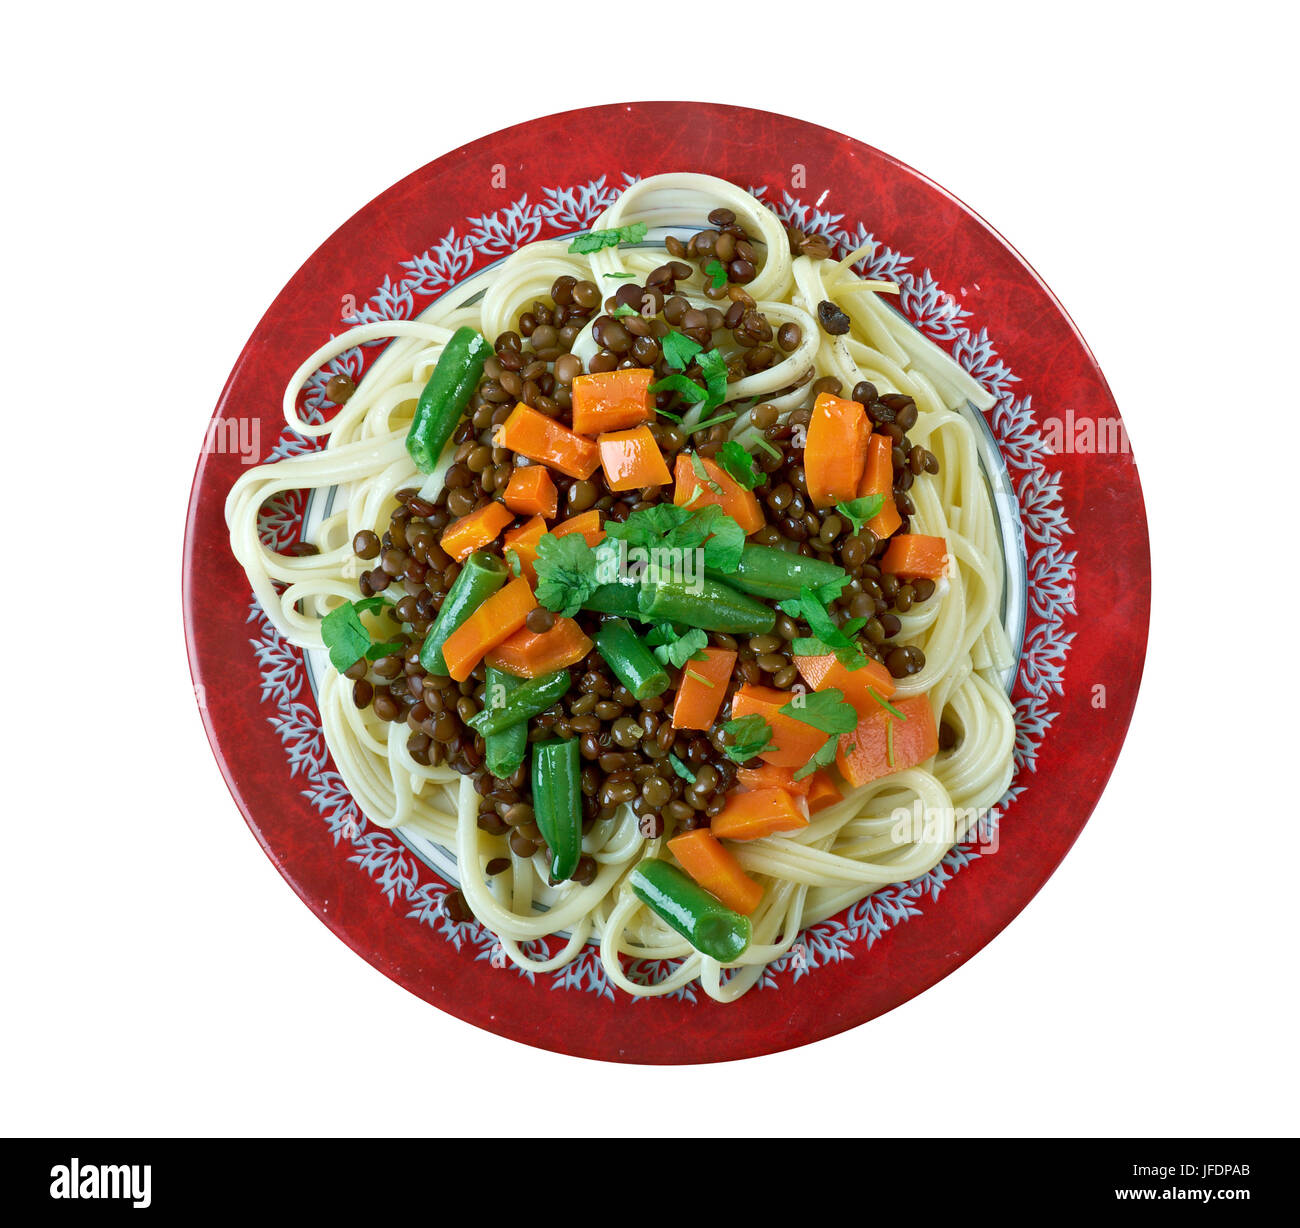 Puy lentil bolognese with pasta Stock Photo